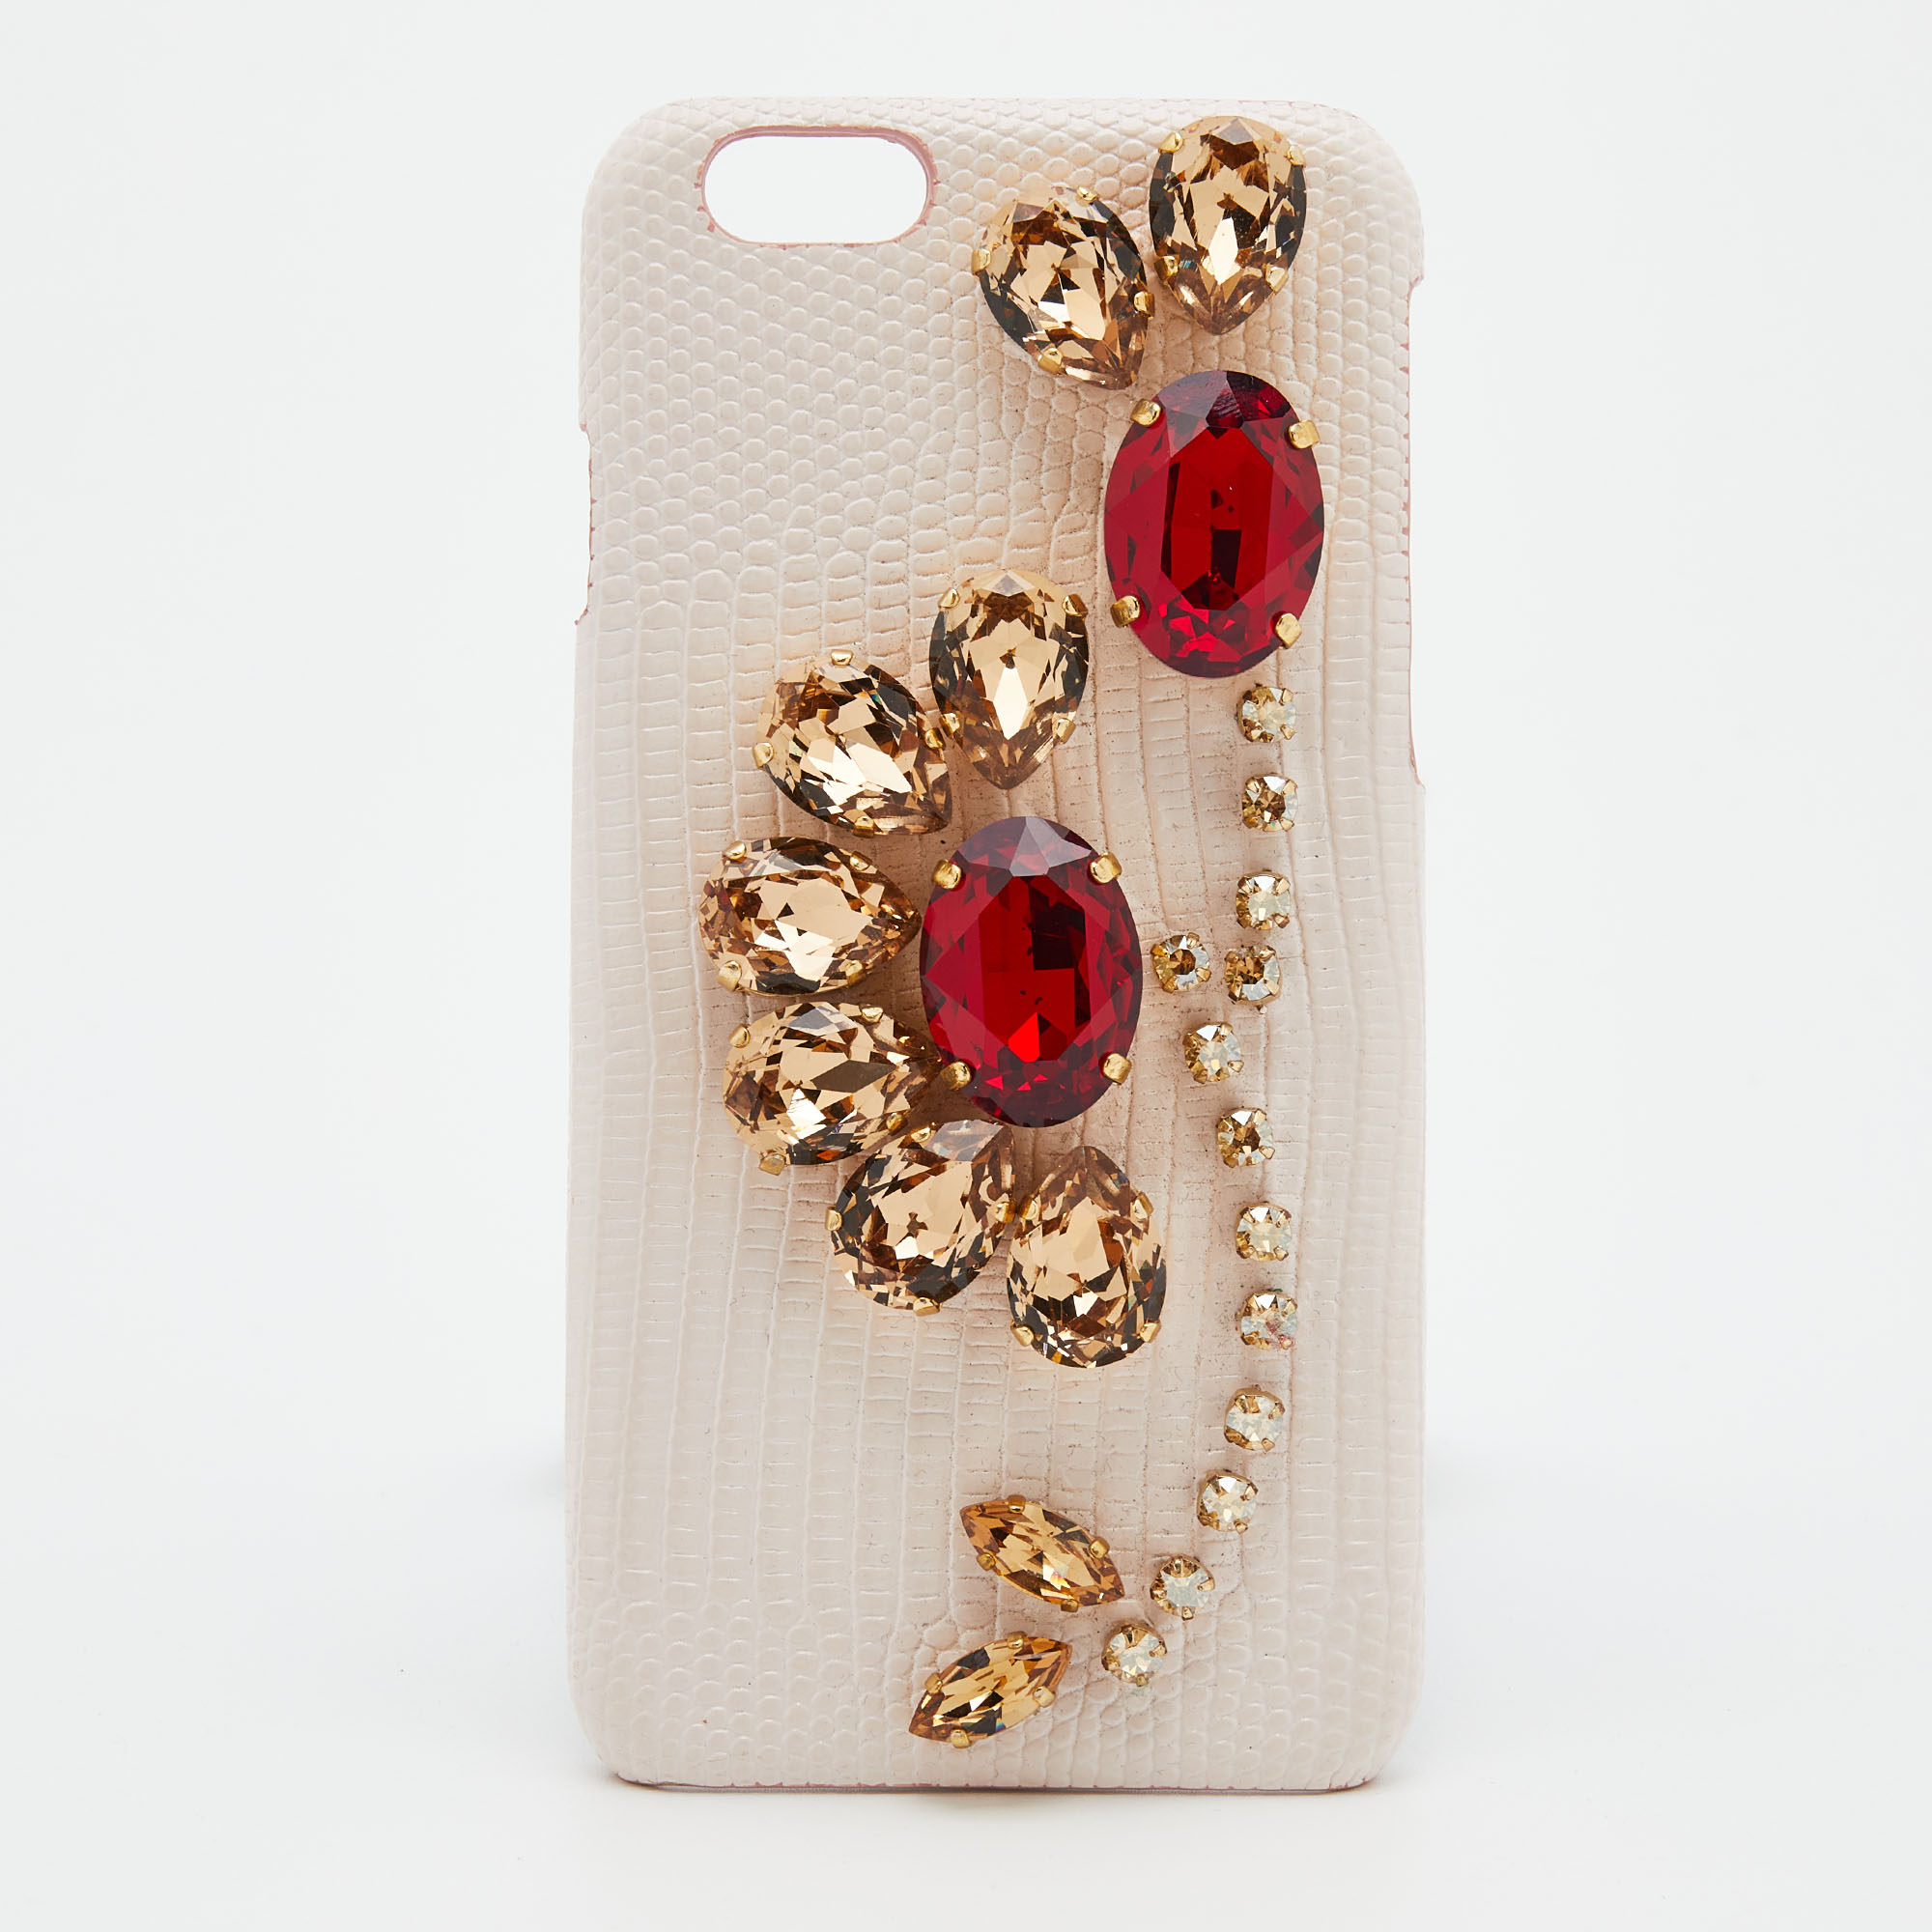 Dolce & gabbana pink lizard embossed leather crystal embellished iphone 6 case